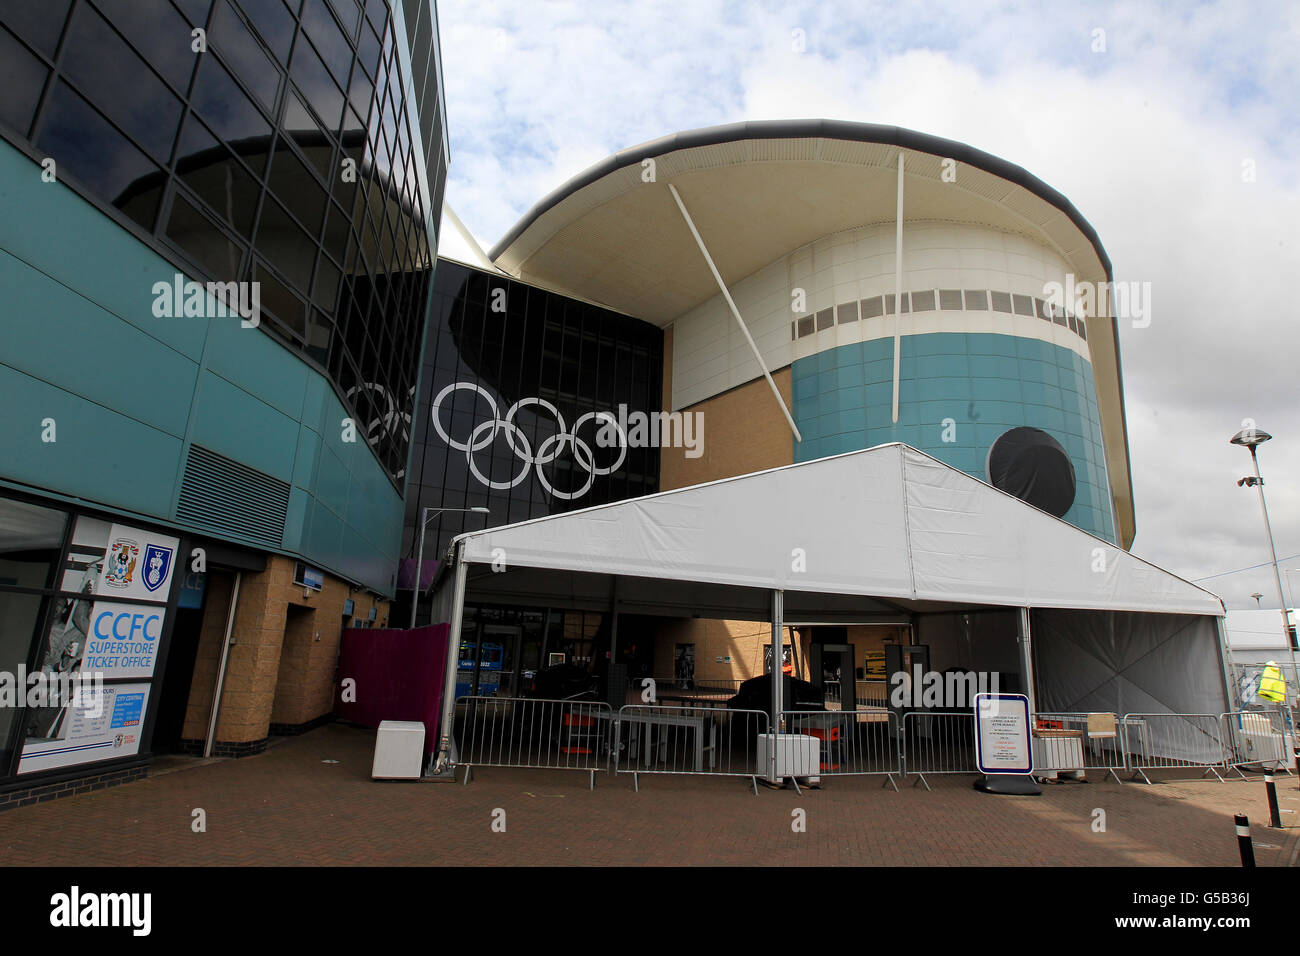 Olympics - London 2012 - Olympic Venues - Coventry Arena Stock Photo